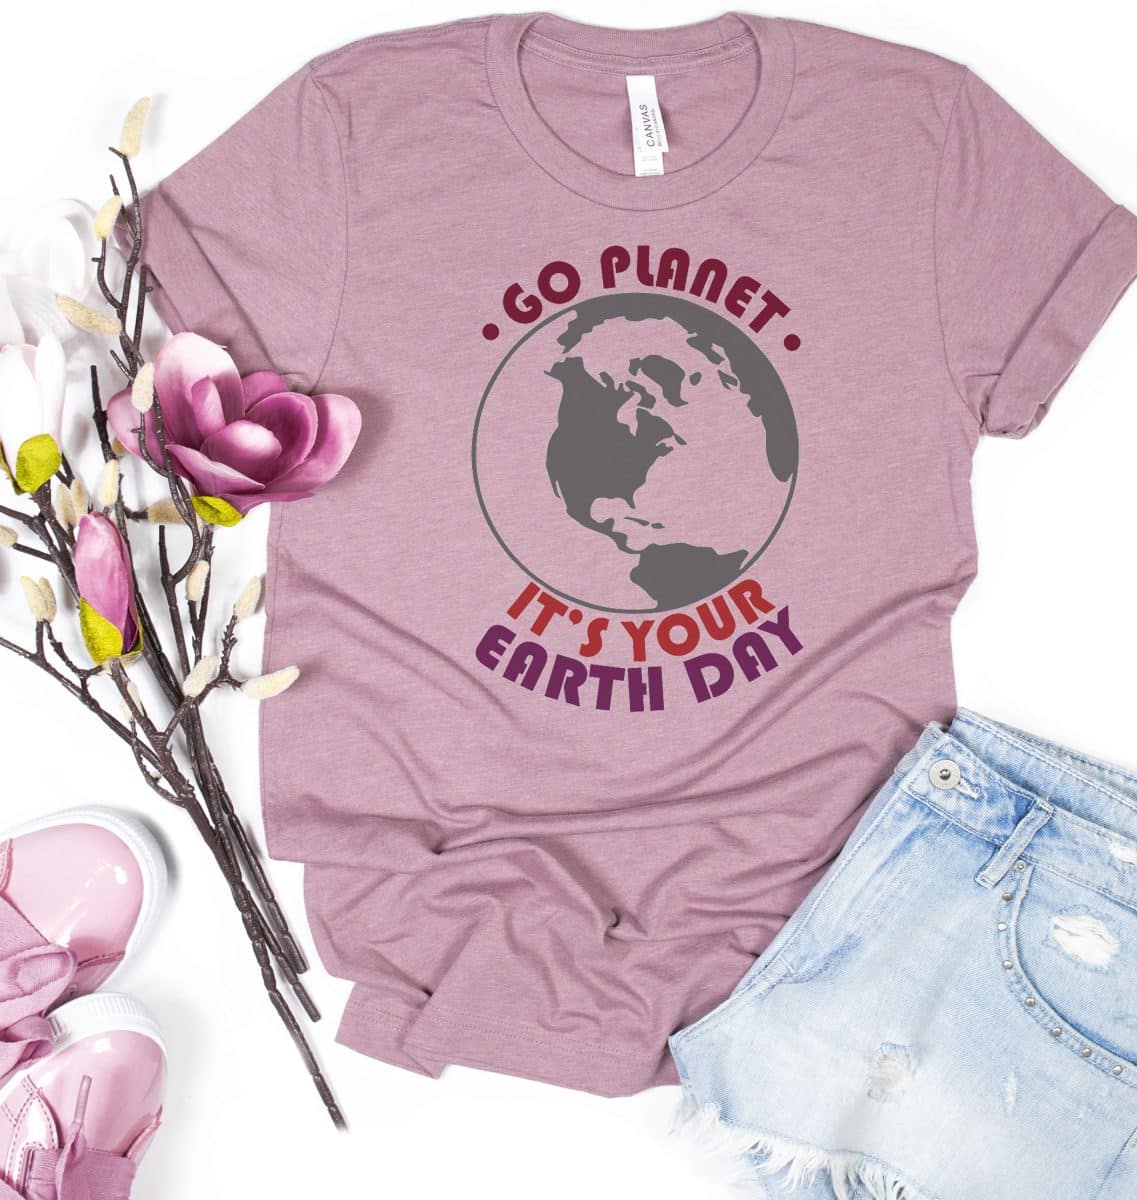 Go Planet by Life Sew Savory